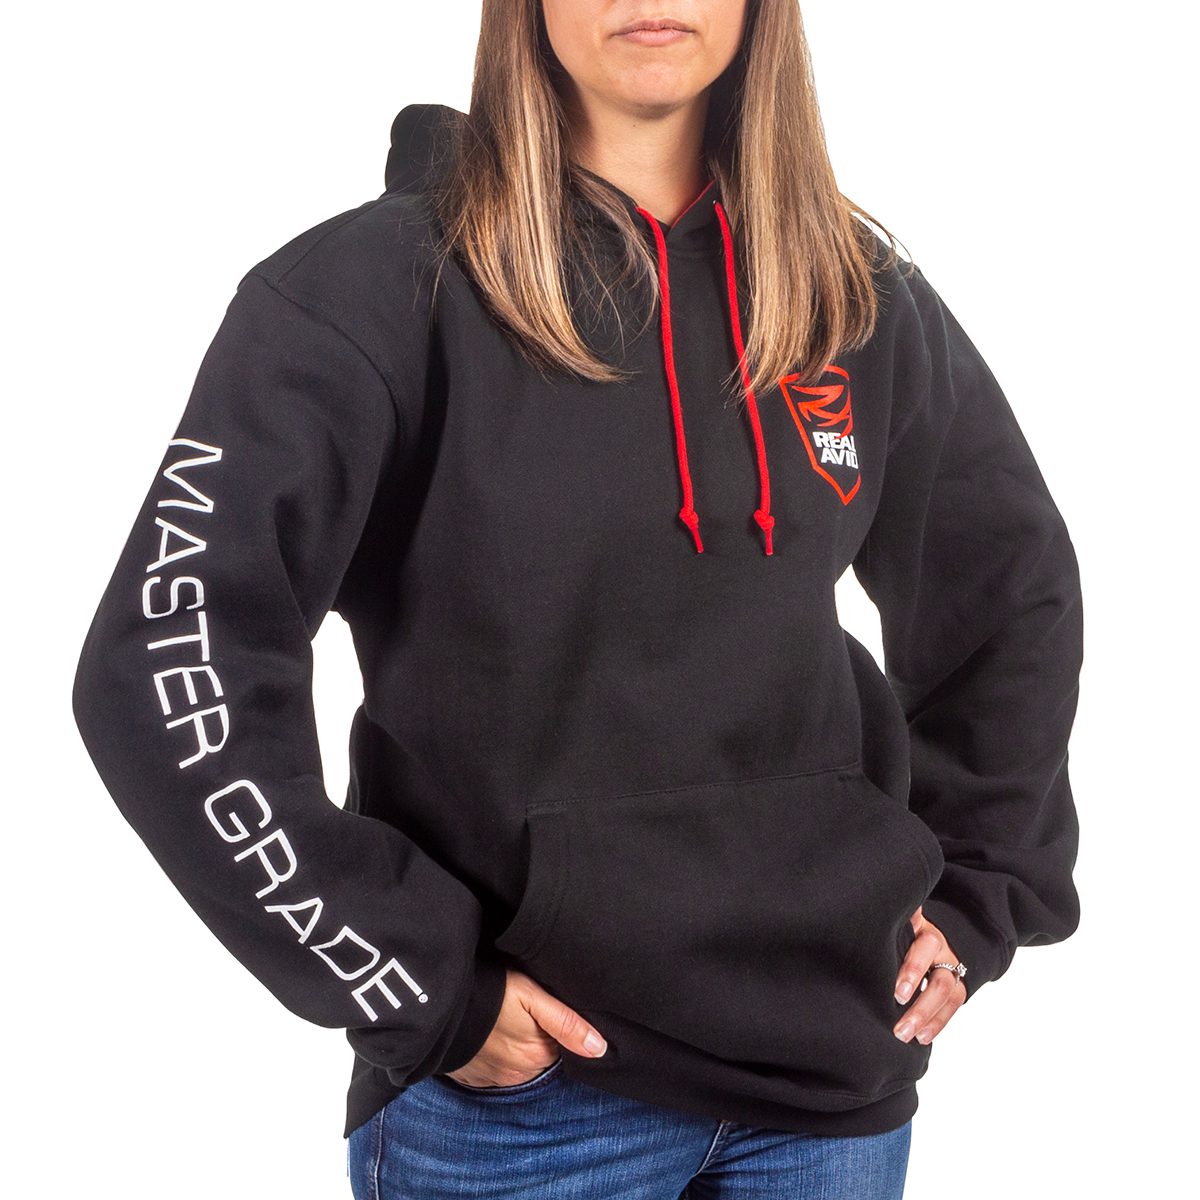 a woman wearing a black hoodie with white writing on it